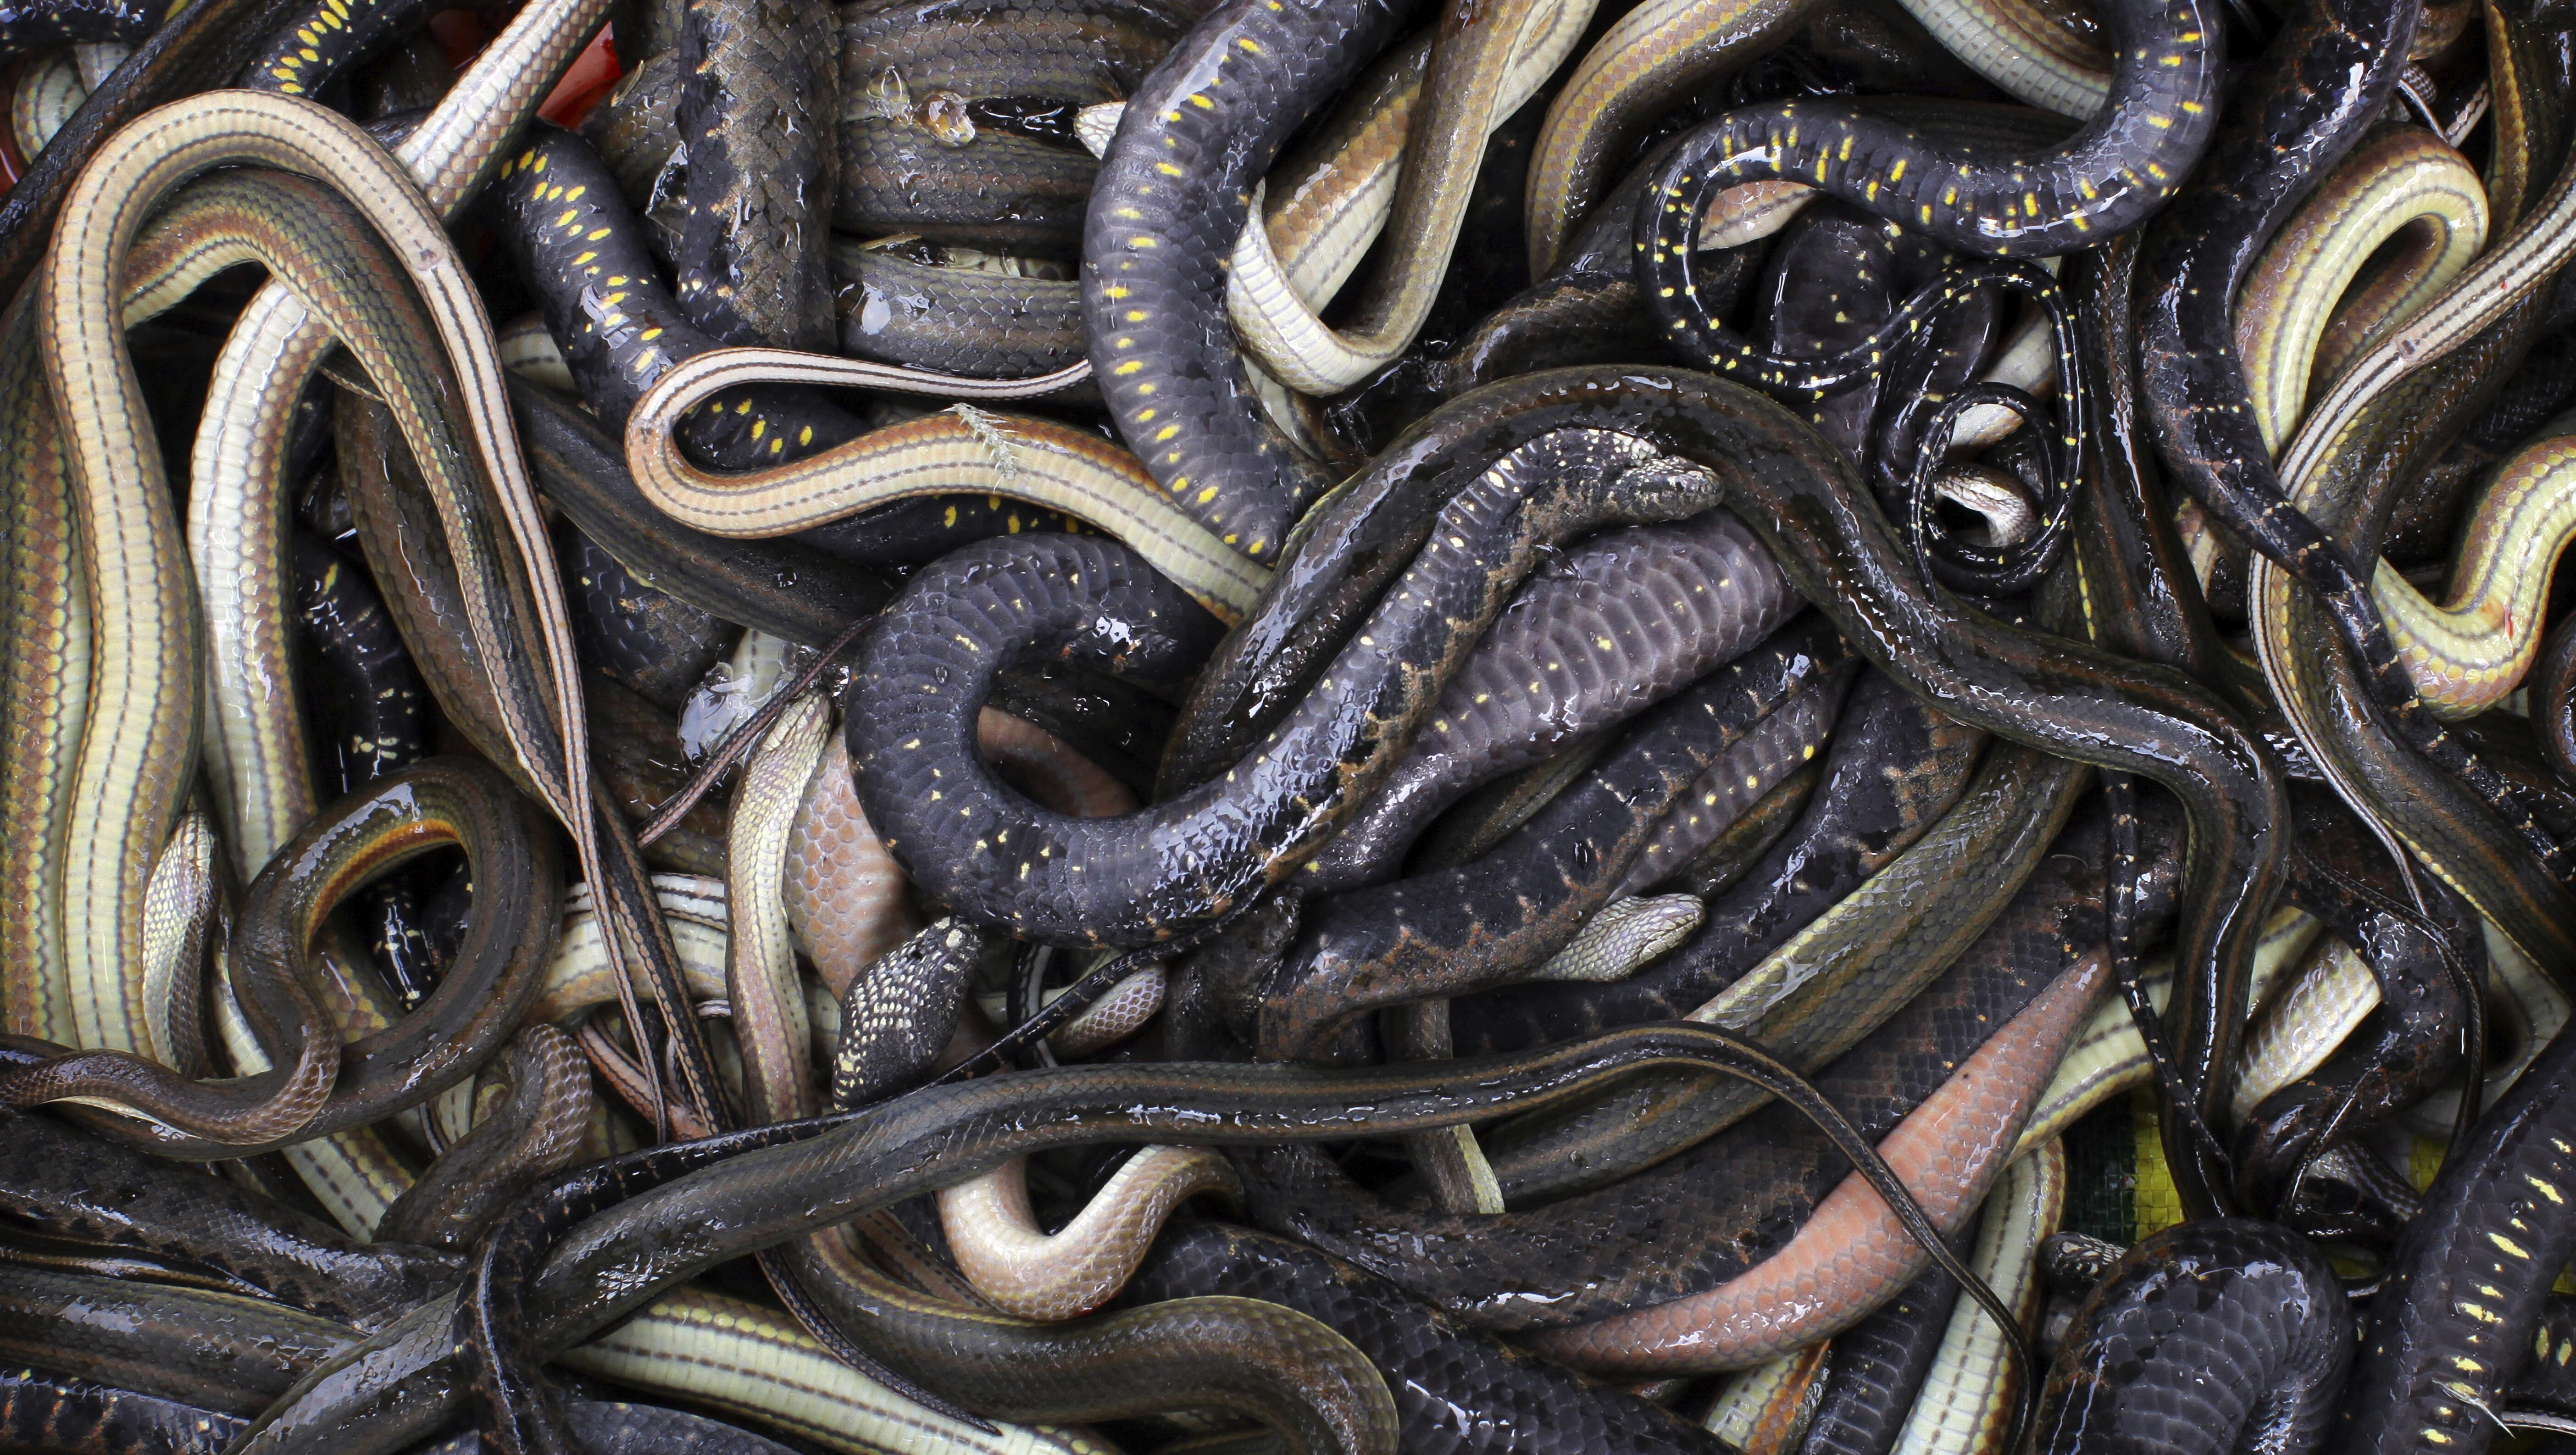 Pantsless Man Crashes Into Jail, Throws Rubber Snakes And Makes Threats